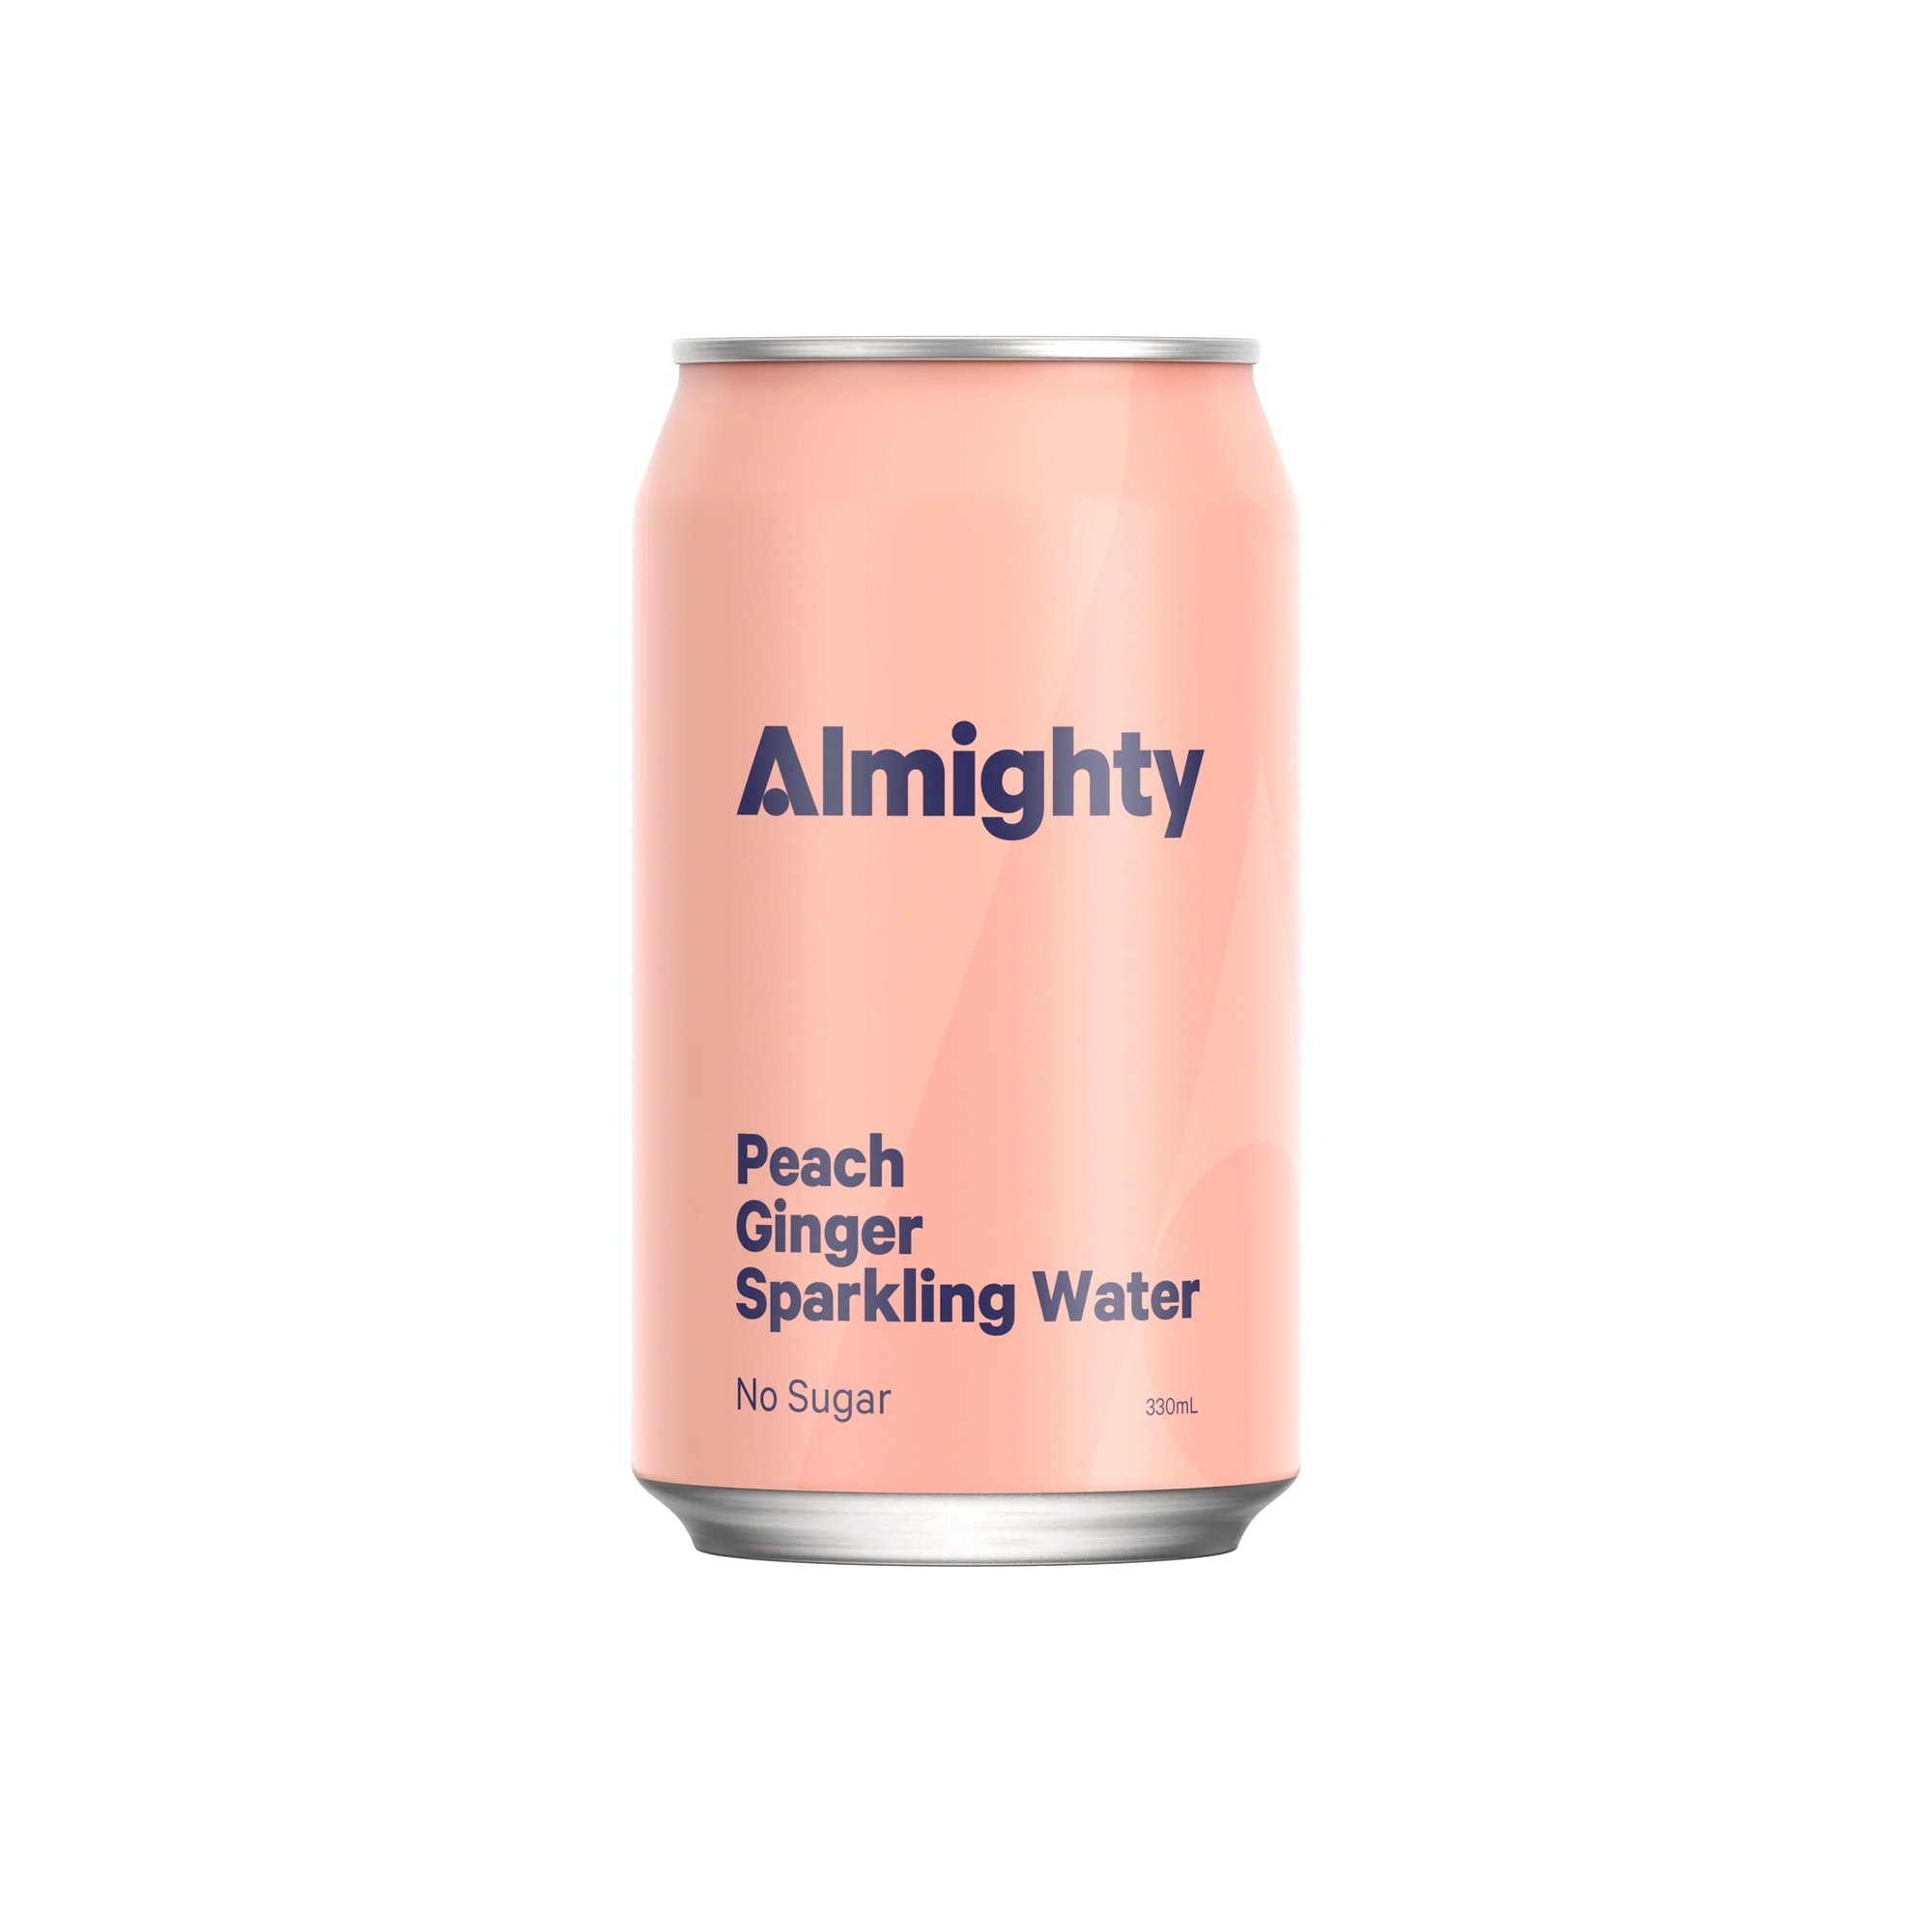 Almighty sparkling water